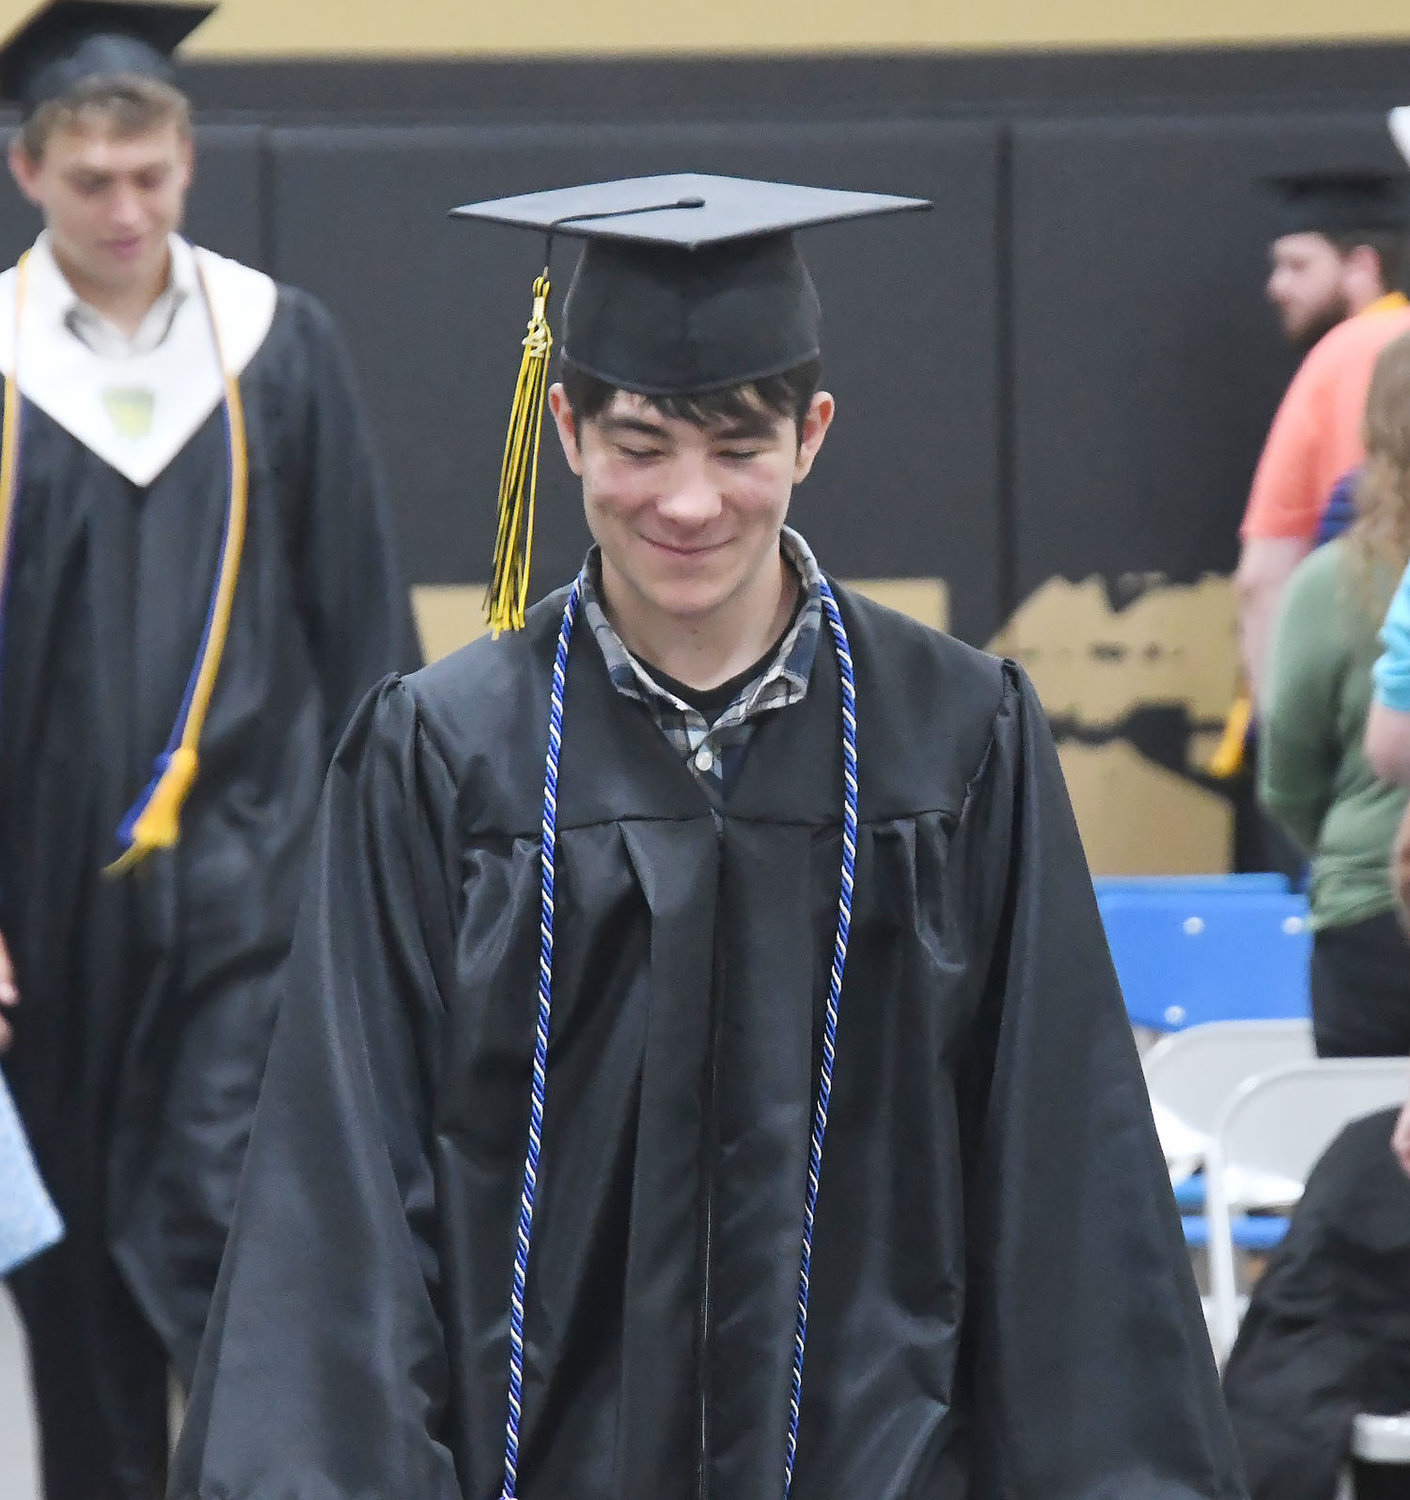 Cairo High School Class of 2022 graduate Zachary Paschall smiles during the processional before Sunday's commencement exercises in the school gymnasium.